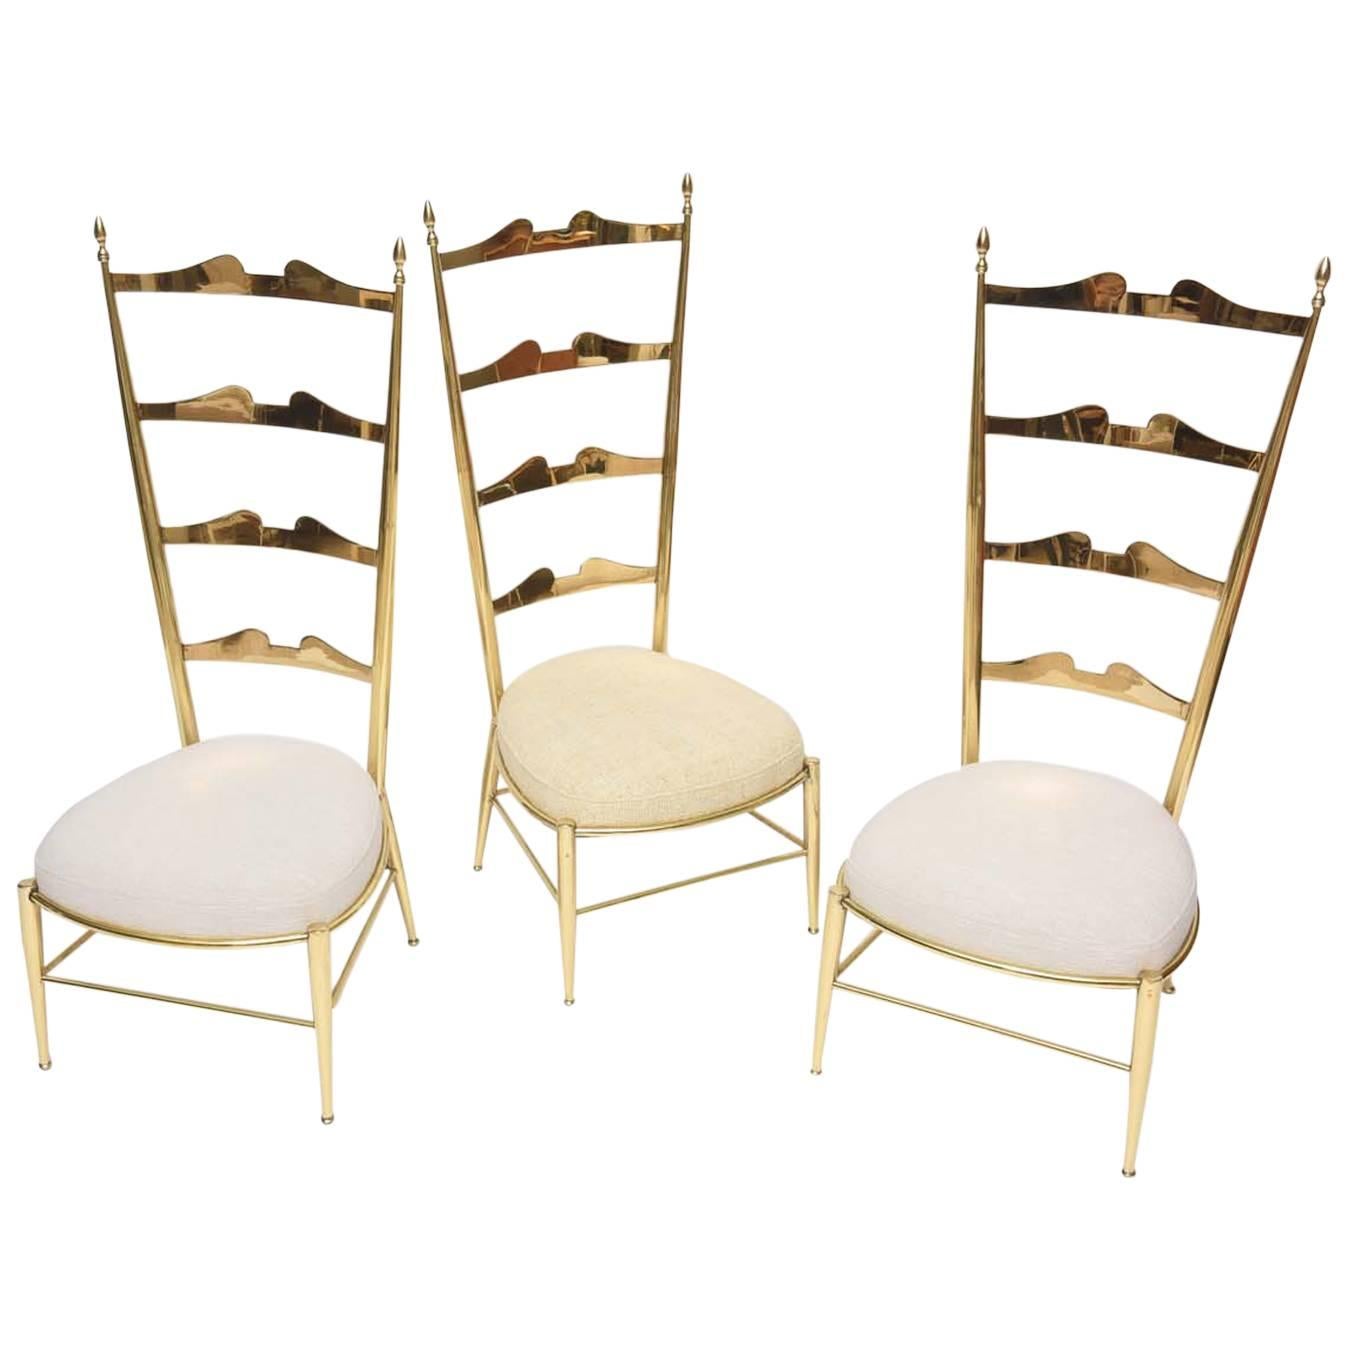 Rare Tall Back Brass Chiavari Chairs with Truncated Legs For Sale